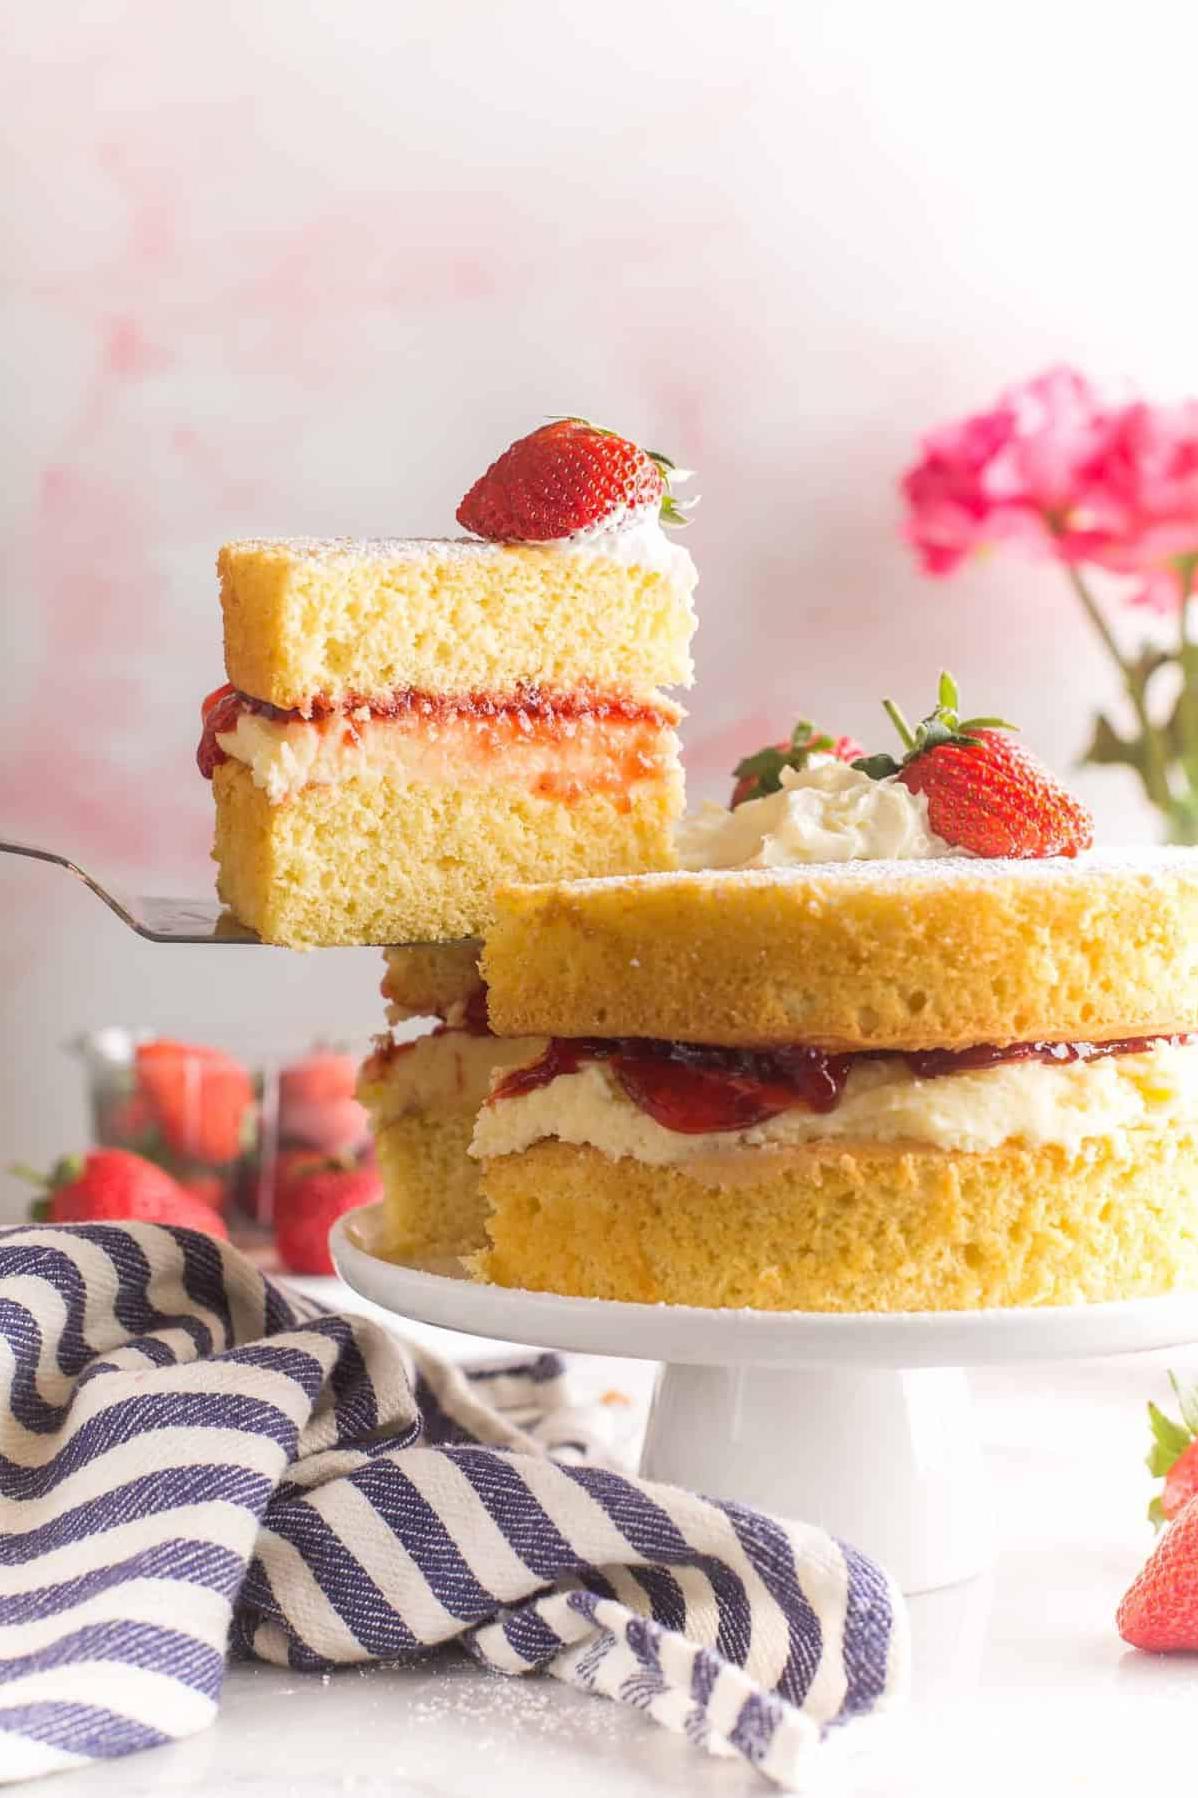 Indulge in a Delectable Gluten-Free Sponge Cake Today!